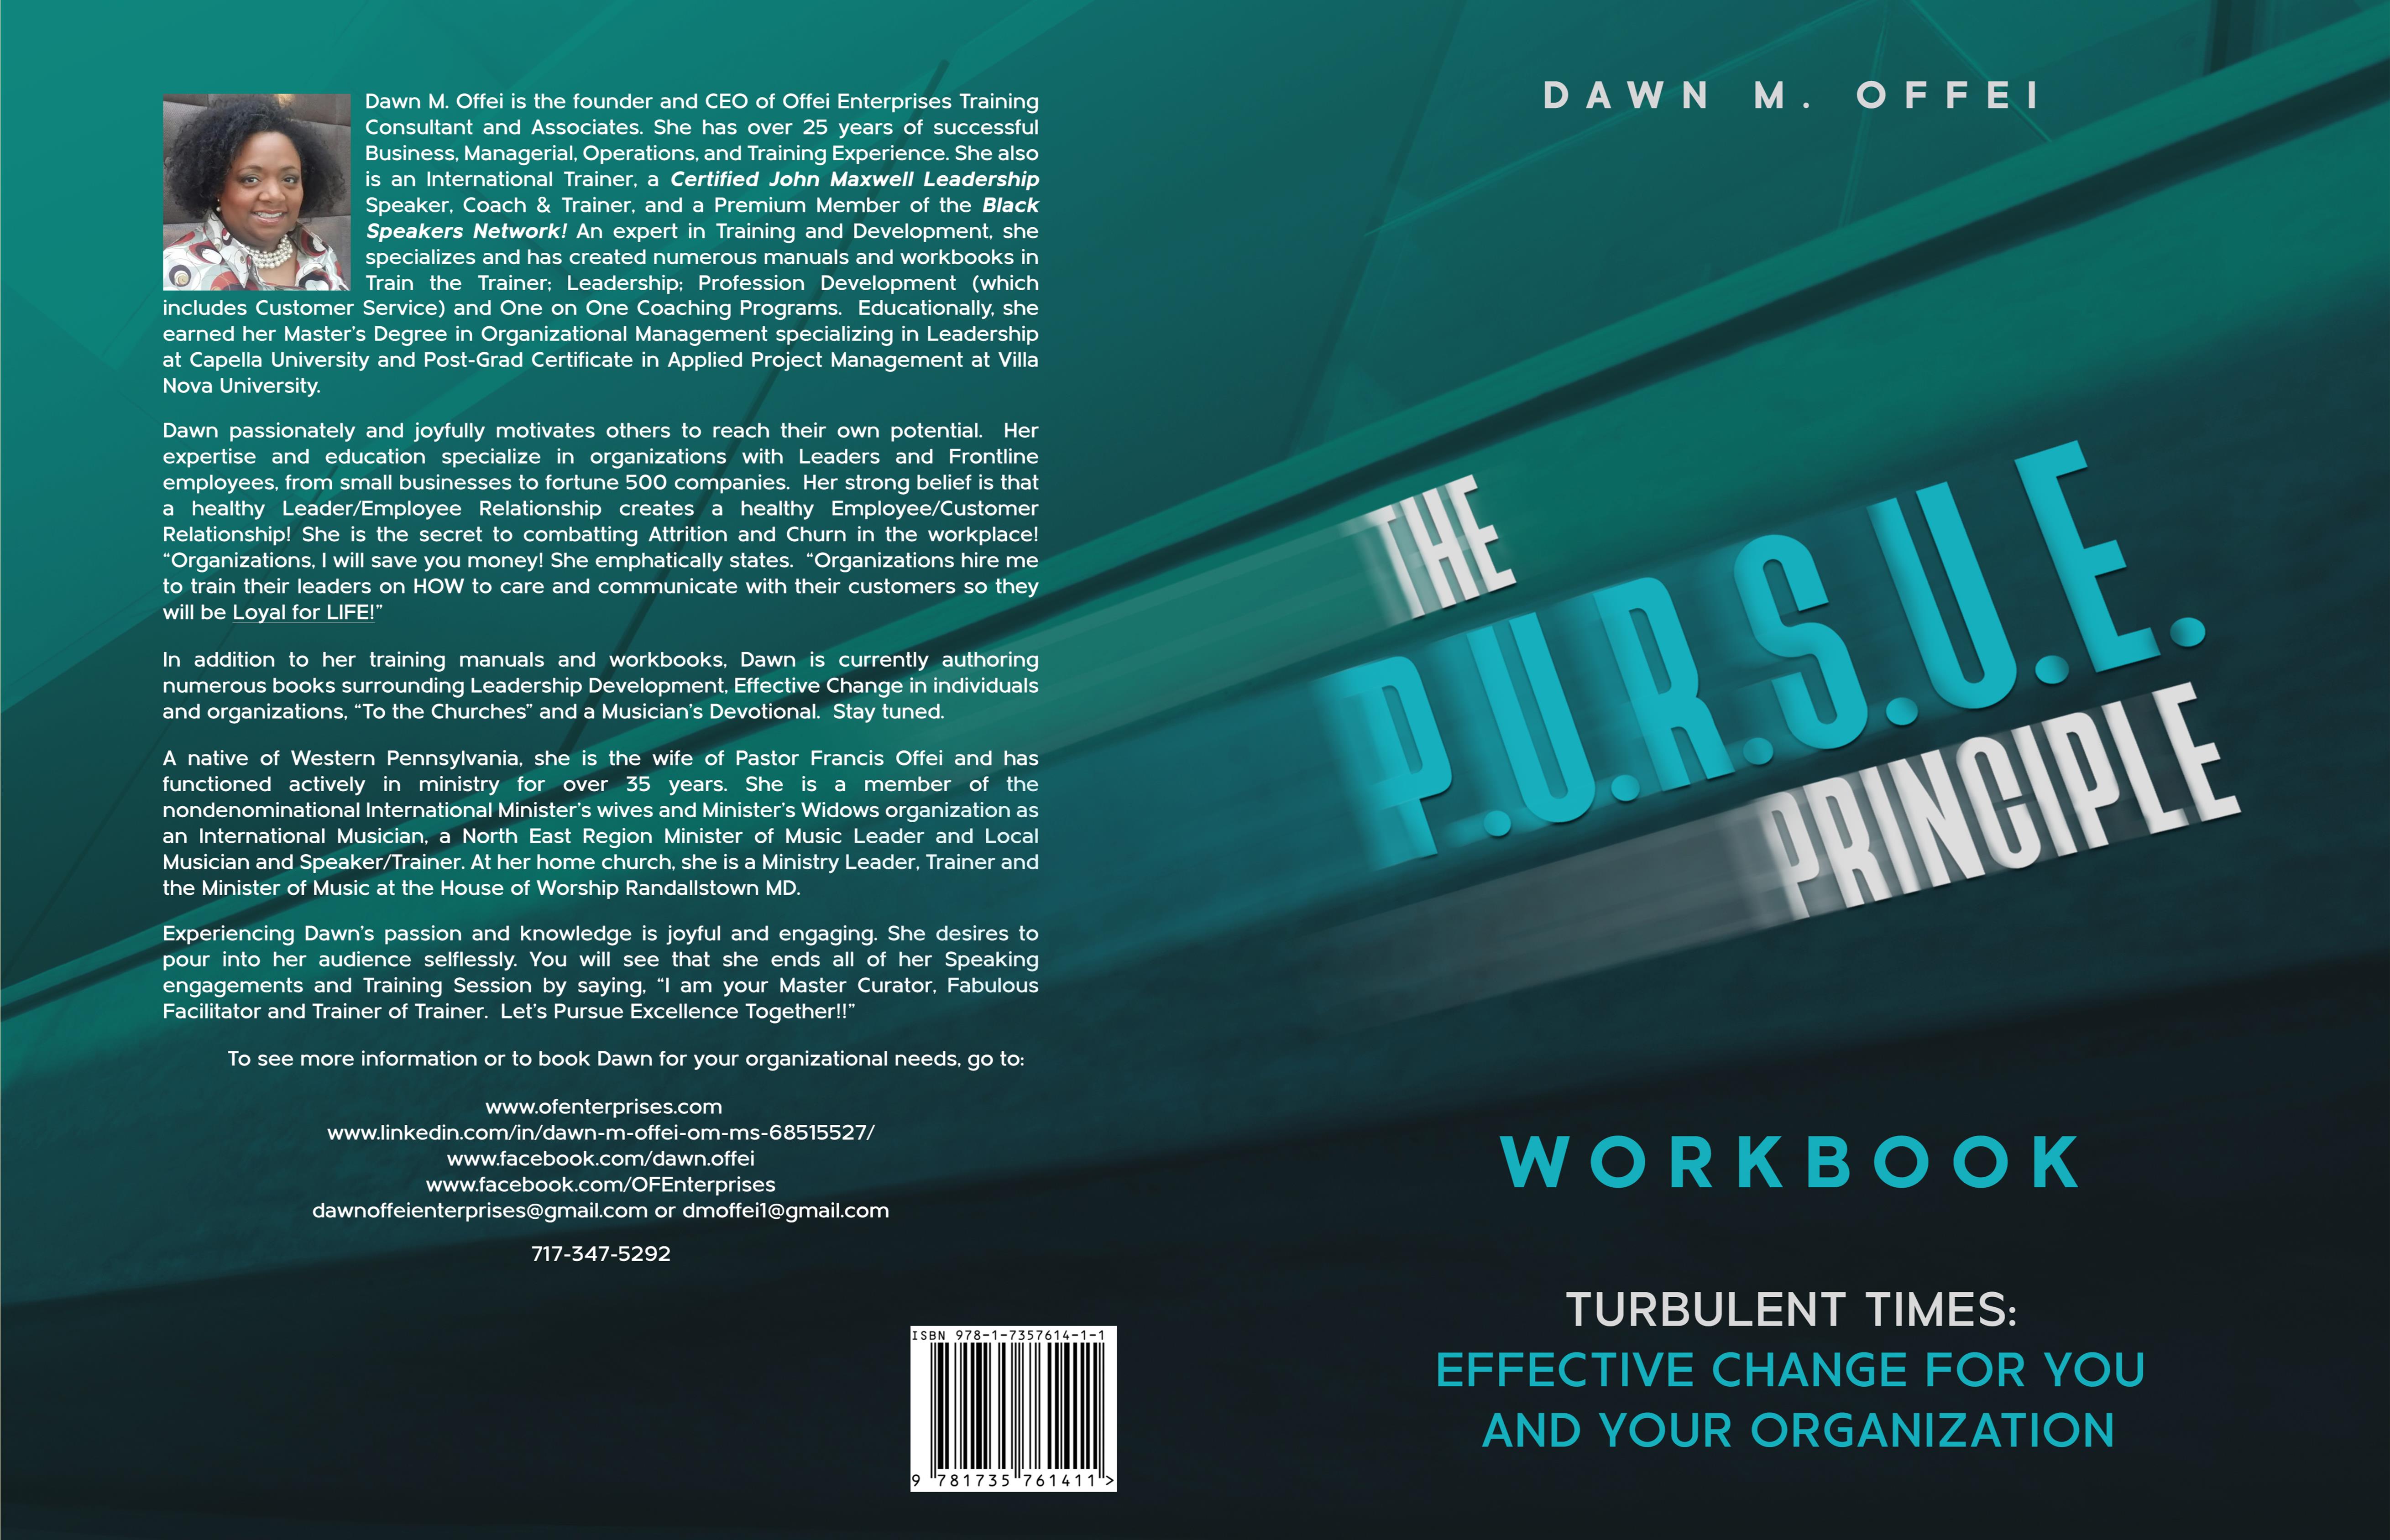 The P,U,R,S,U,E, Principle: Turbulent Times, Effective Change for You and Your Organization WORKBOOK cover image